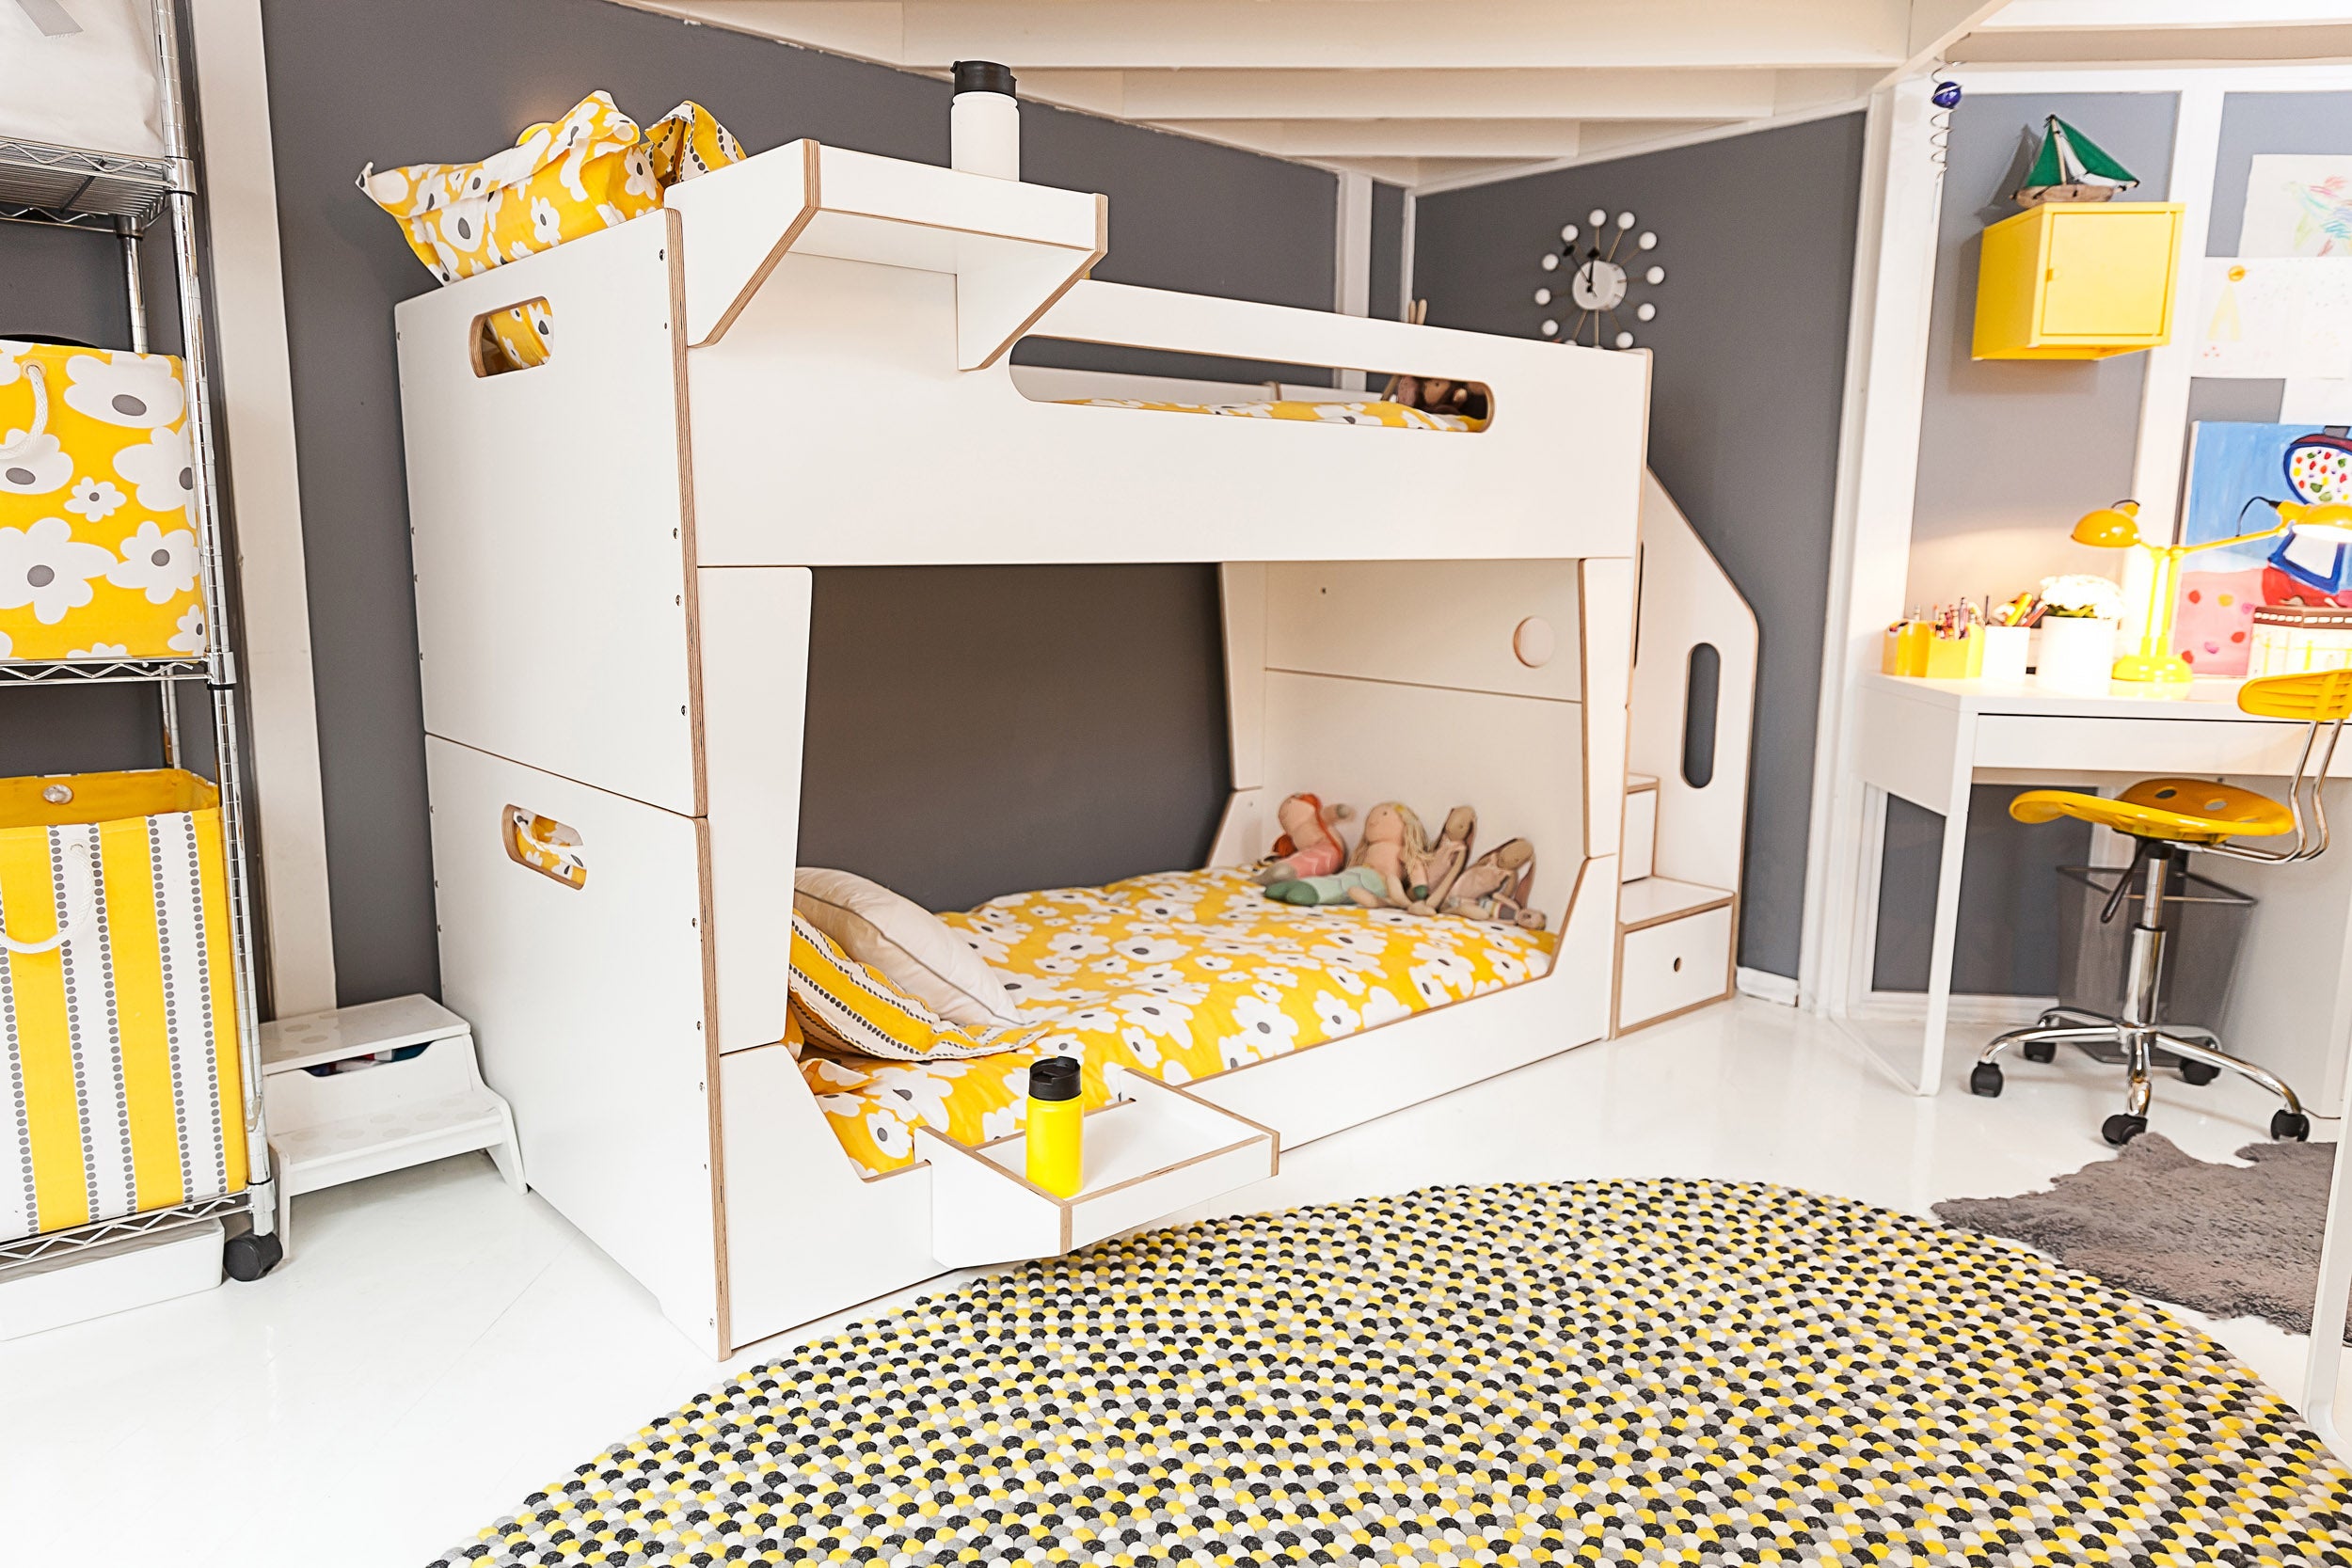 A bunk bed in a room